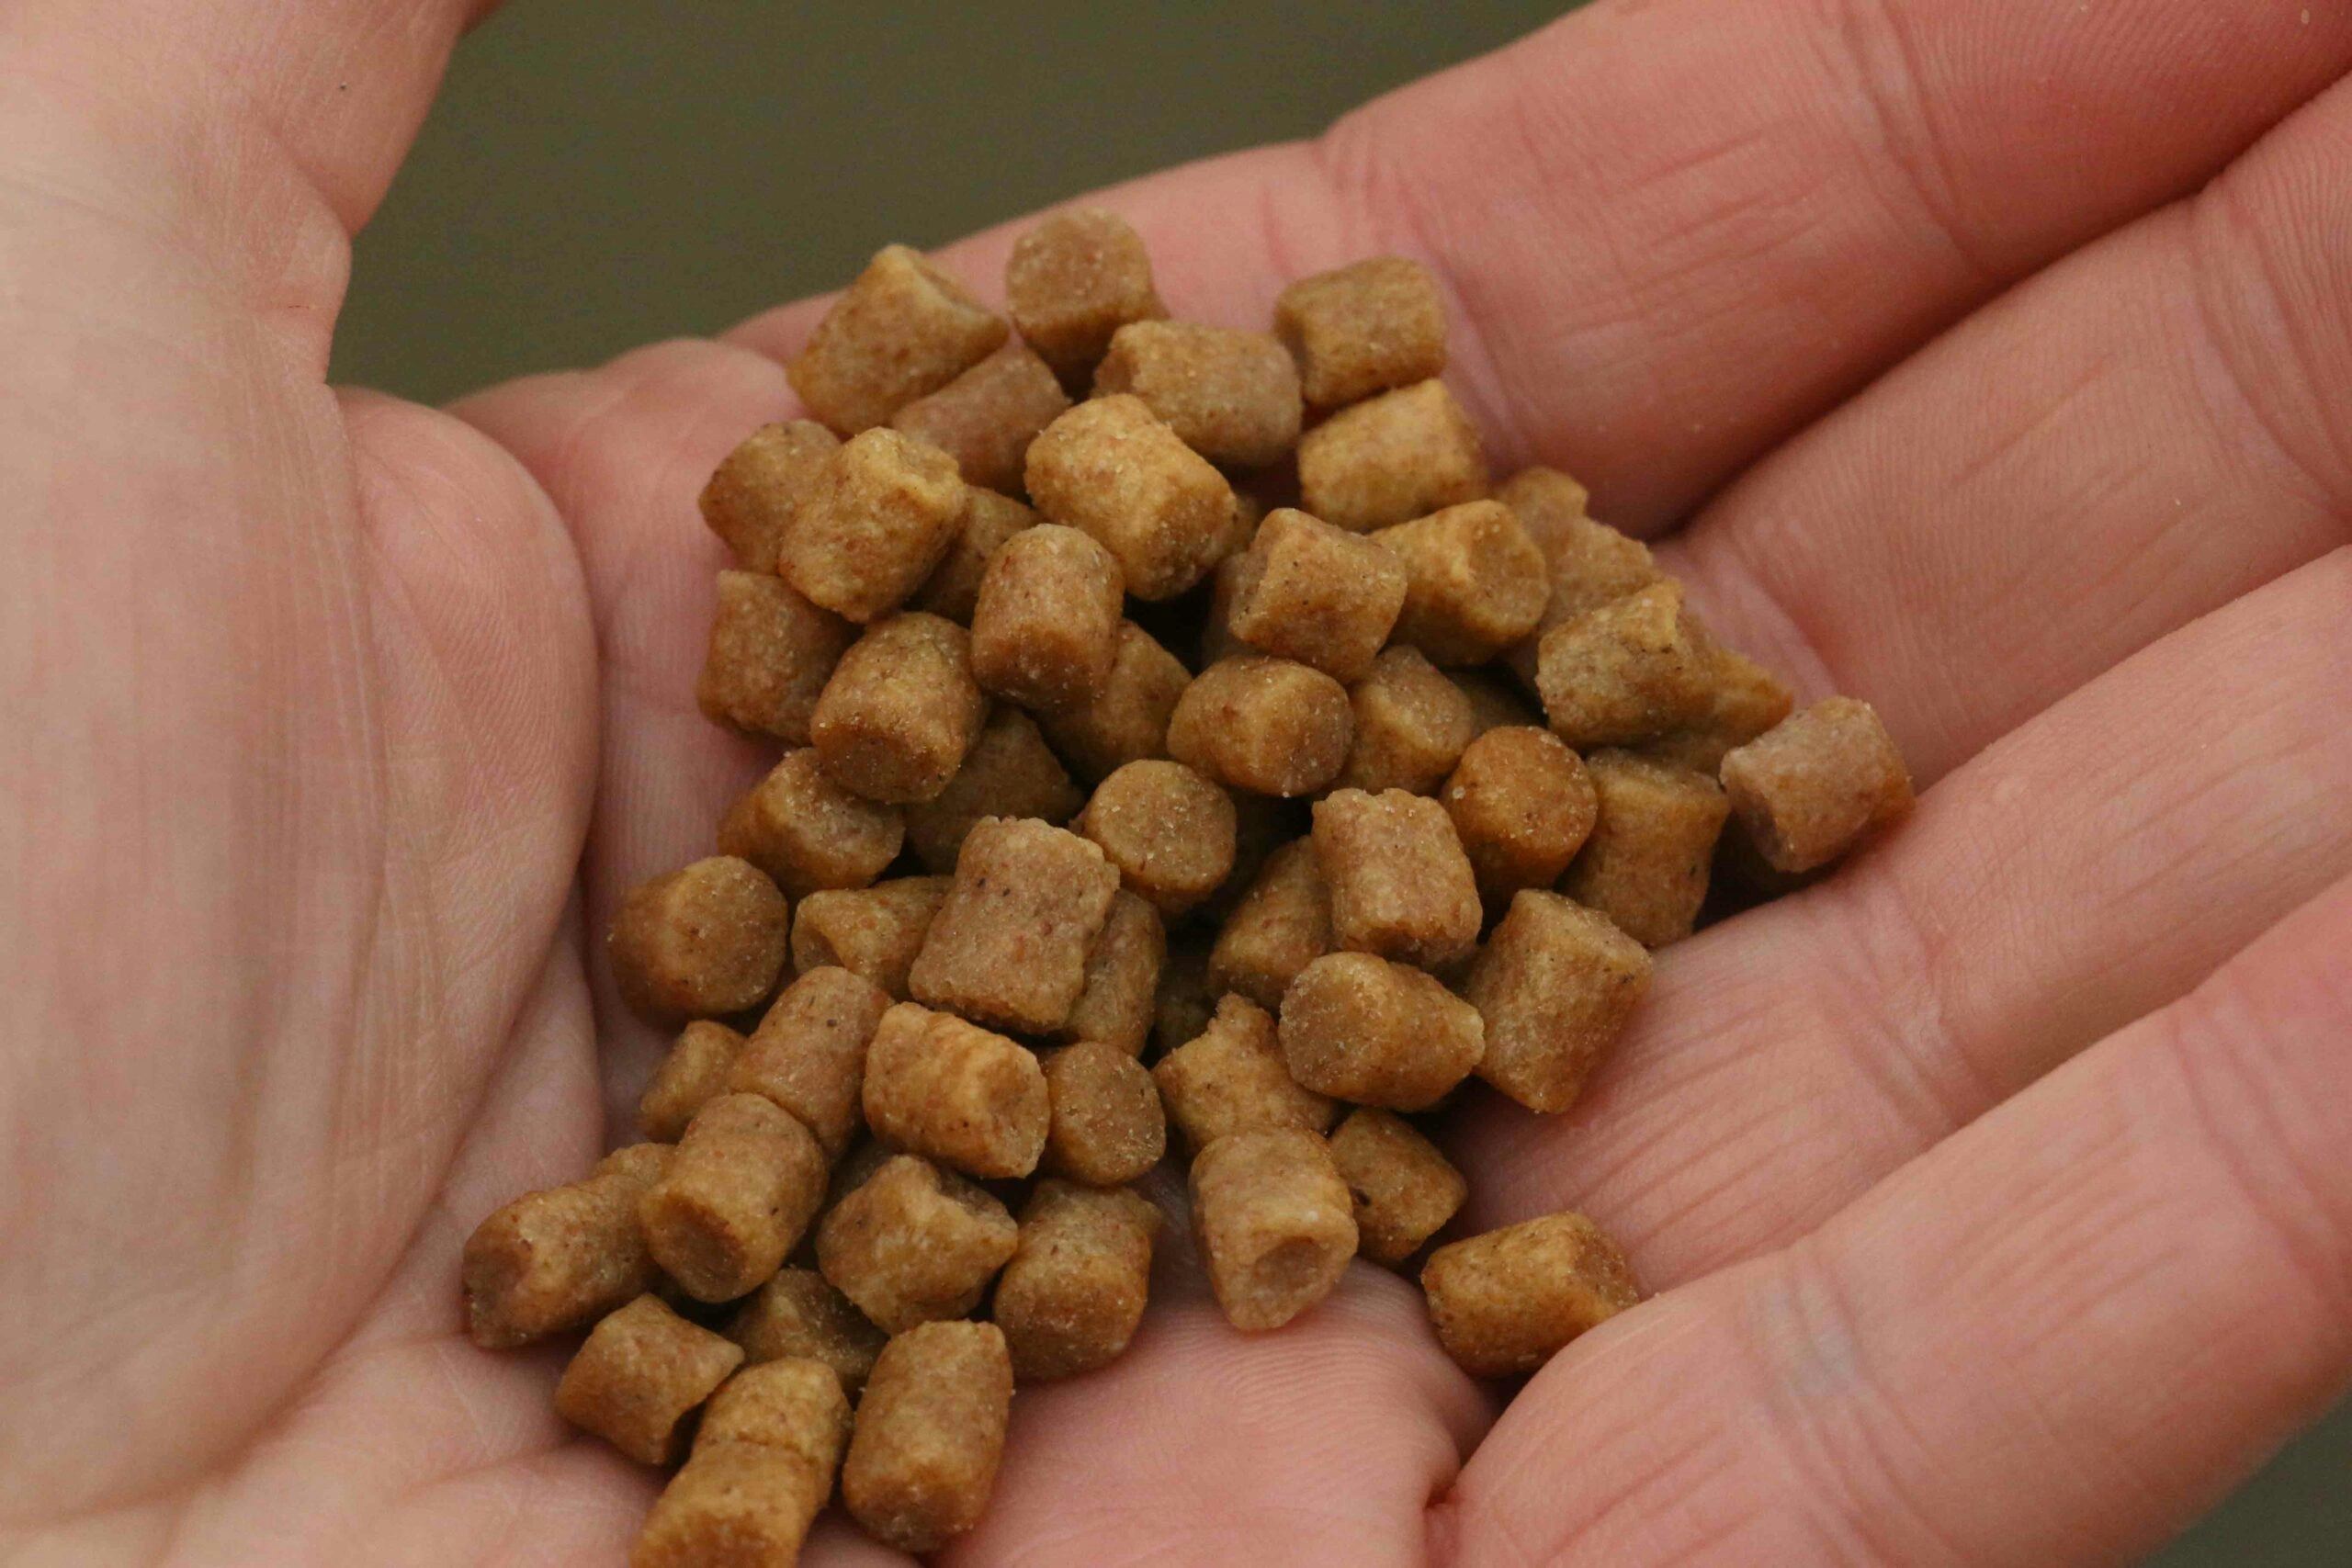 Pellets have transformed the bait choices of many anglers.